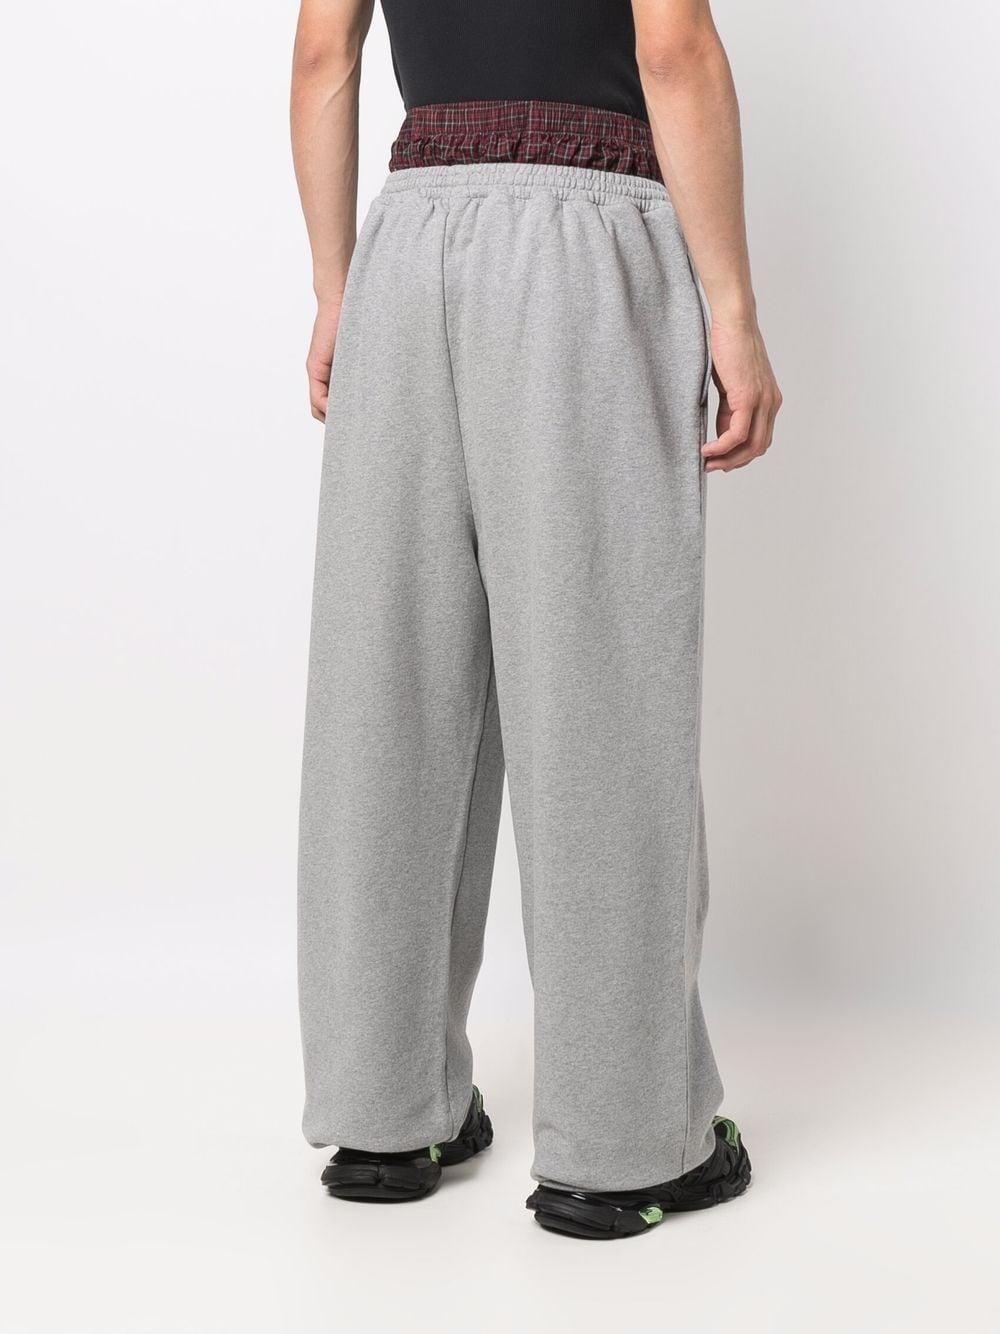 Balenciaga Trompe-l'oeil Double Waistband Sweatpants Red And Grey In ...